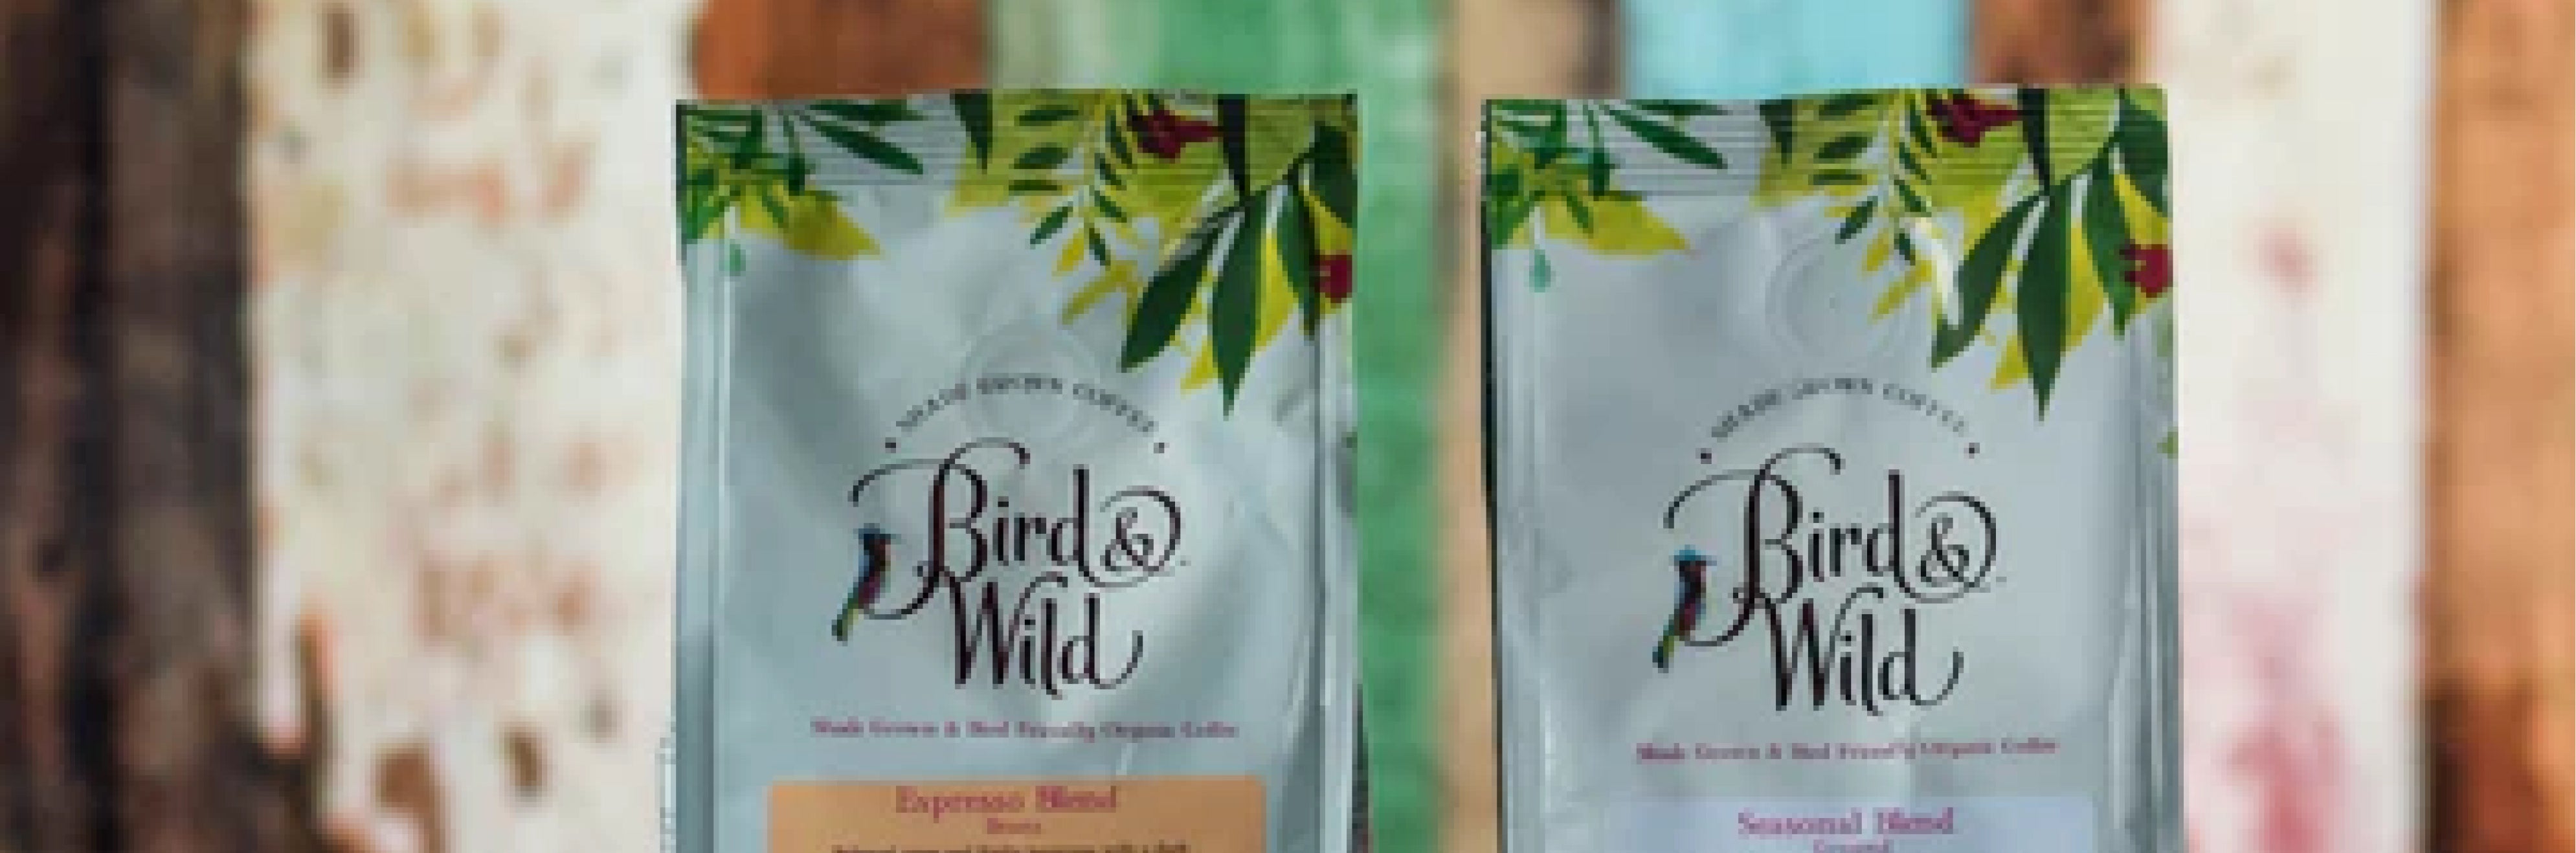 Bird & Wild Shortlisted for the Sustainable Business Awards - Bird & Wild Coffee